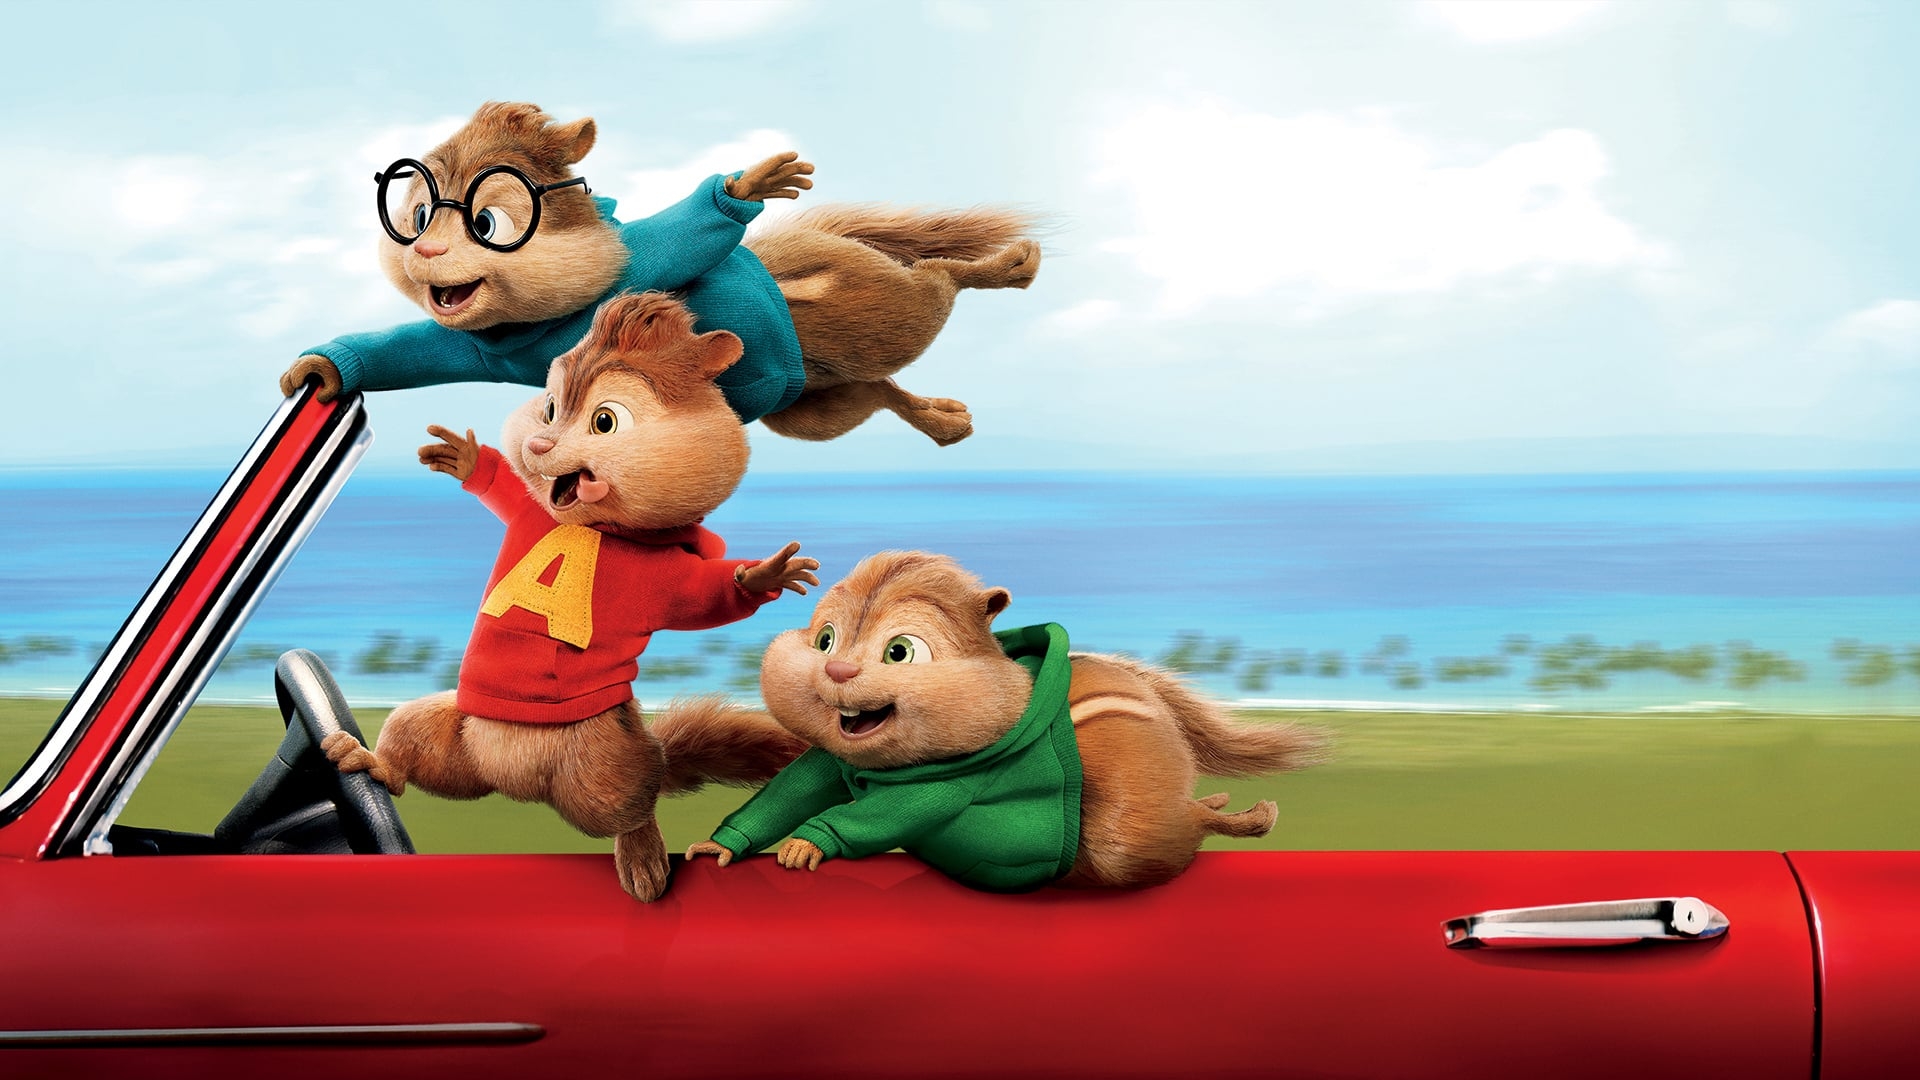 Alvin and the Chipmunks: The Road Chip (Alvin and the Chipmunks: The Road Chip)